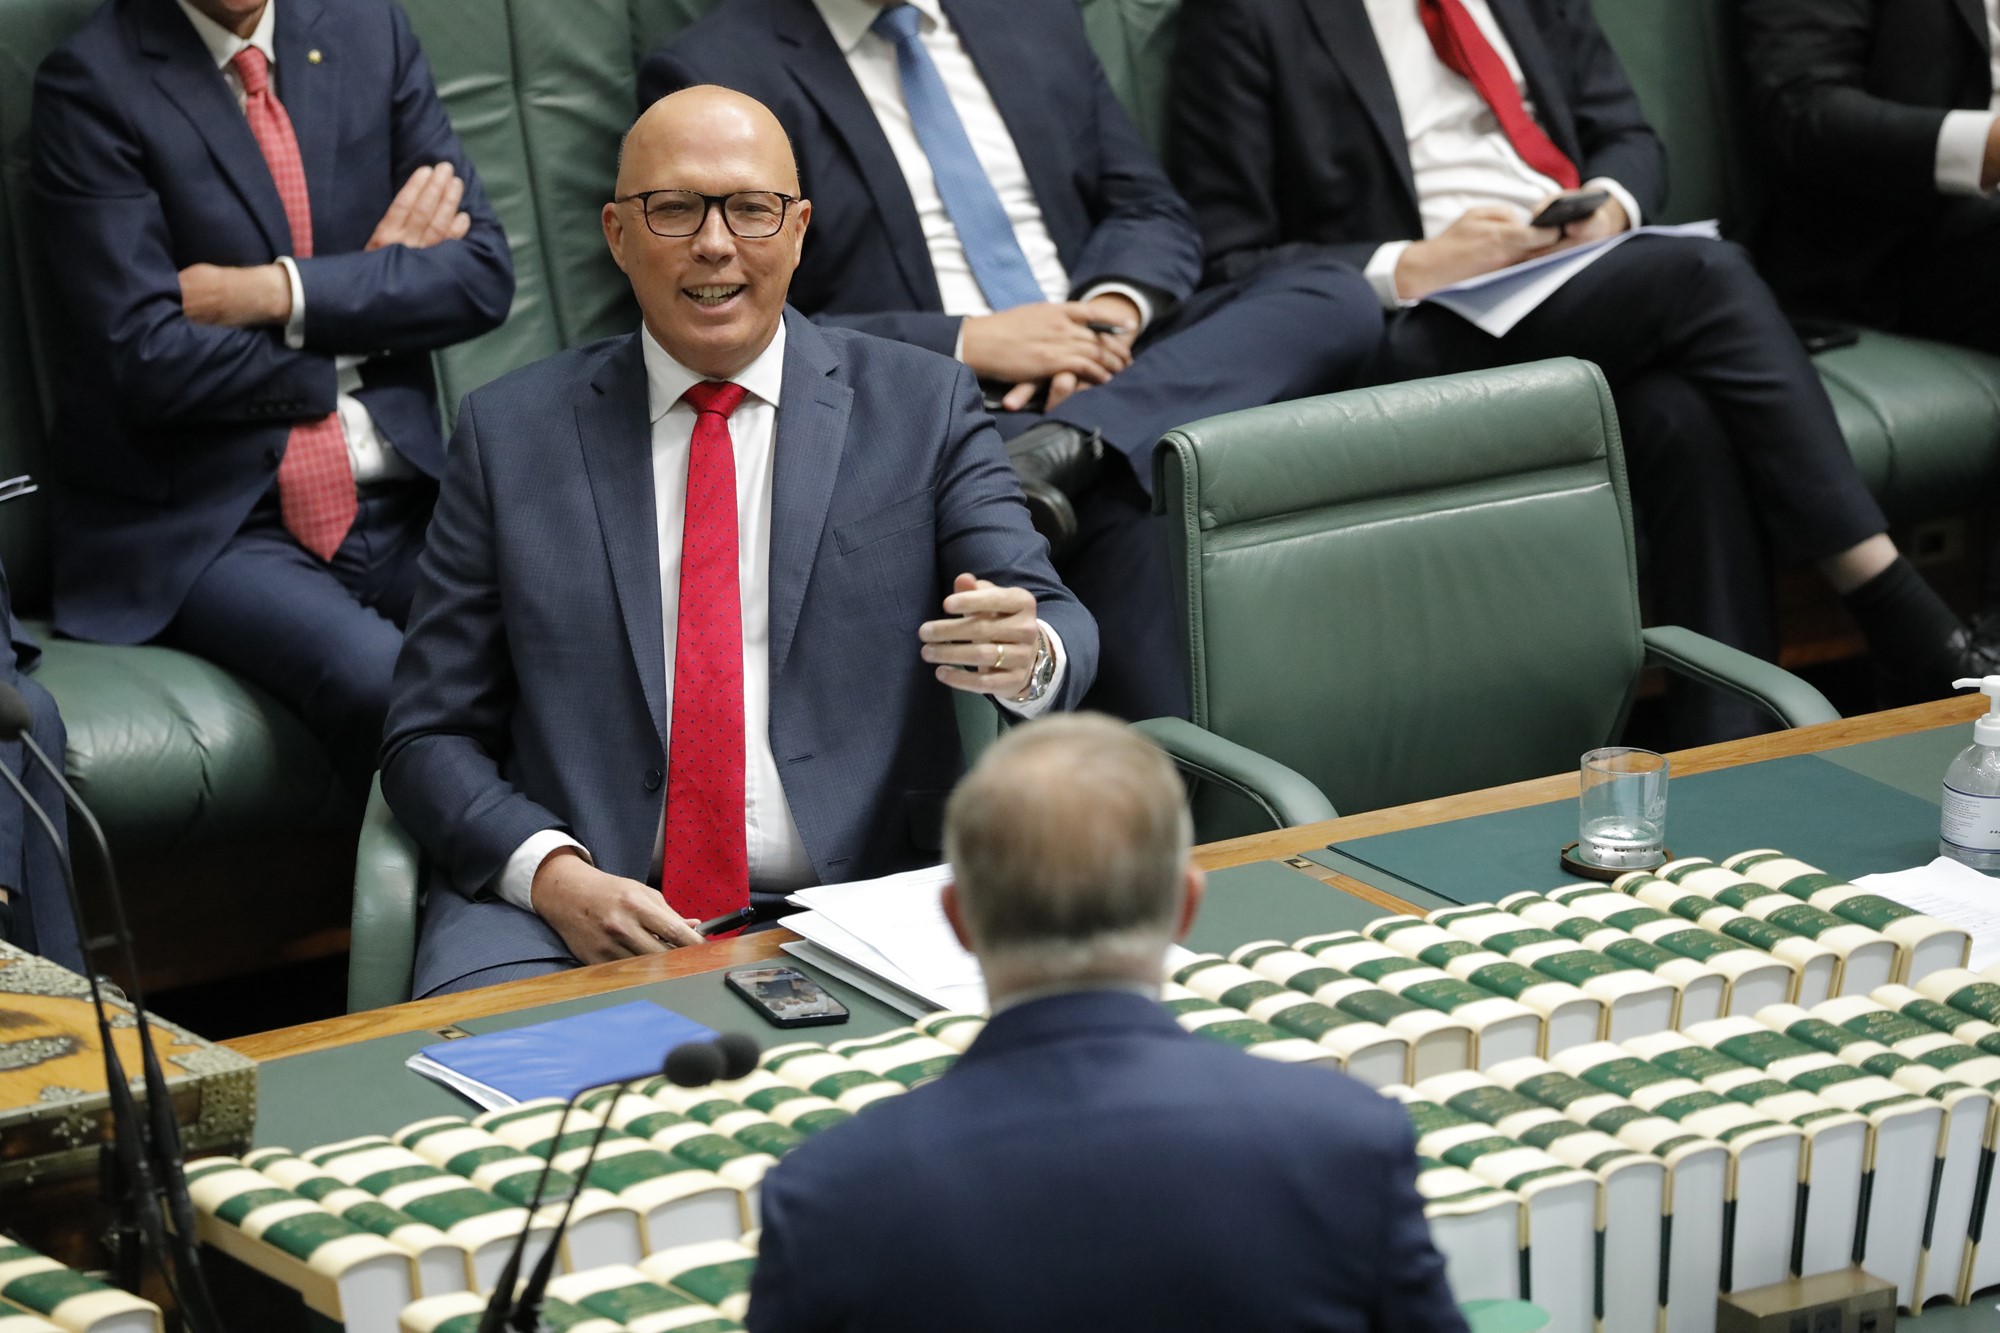 peter dutton gestures at anthony albanese across the table in the house of representatives